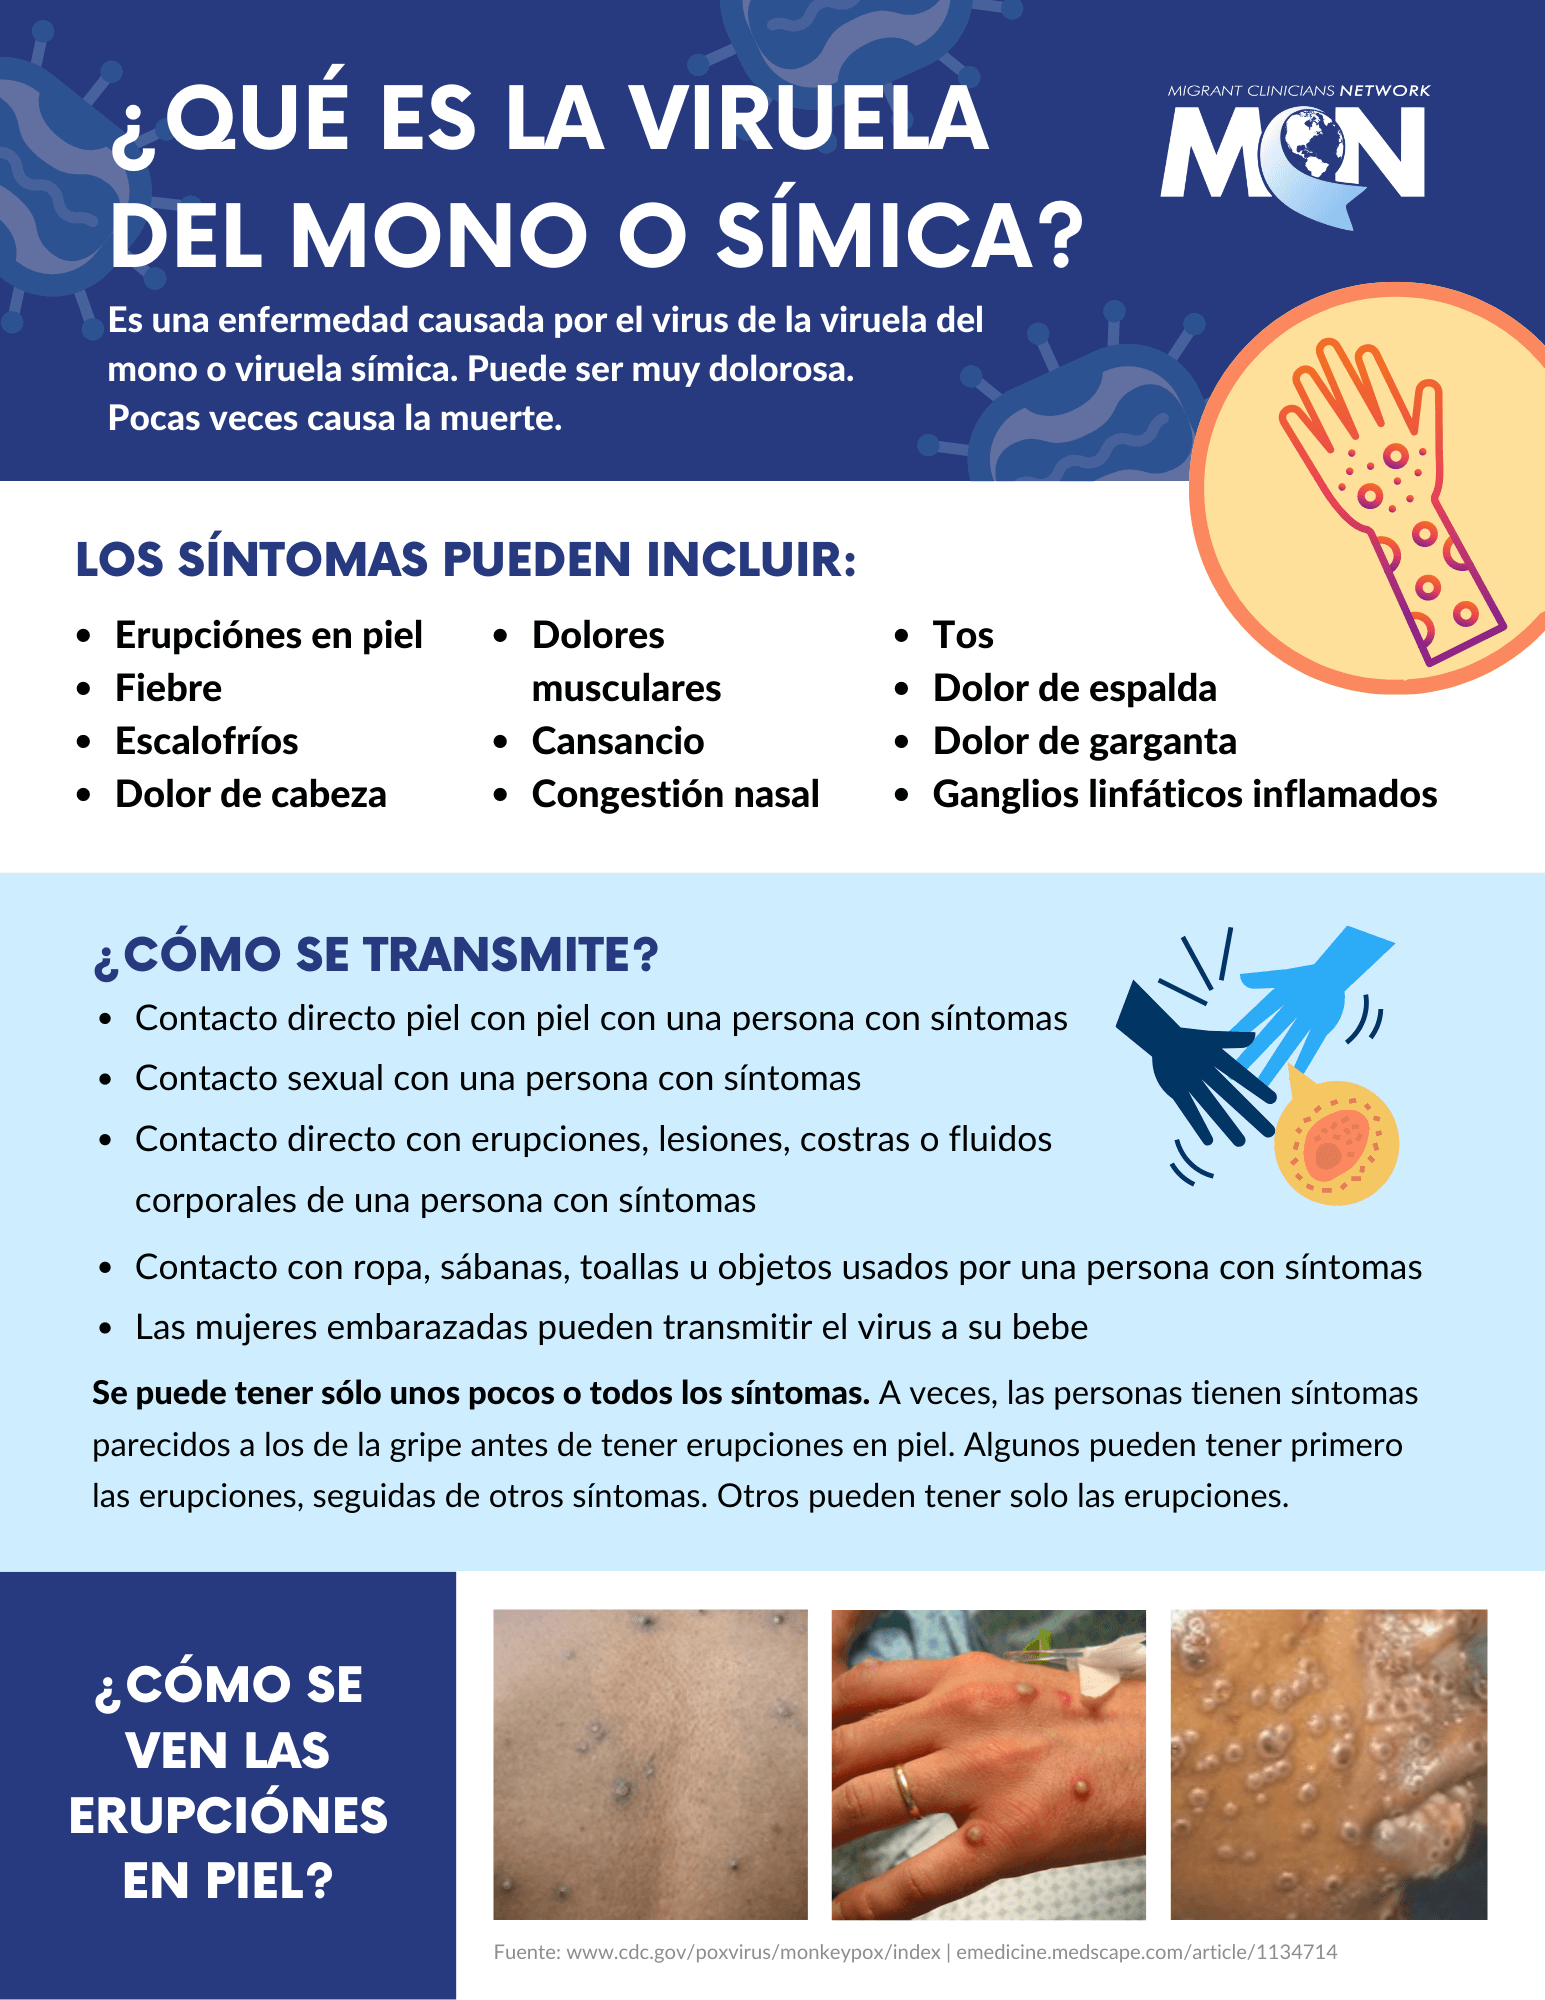 Factsheet with dark blue, light blue, and white background and Migrant Clinicians Network logo at top right corner. Information is in Spanish and is divided into four horizontal sections with the following topics: What is monkeypox?; Symptoms; how it spreads; what does monkeypox look like? Images of monkeypox rash and bumps on back, hand, and face are along the bottom.